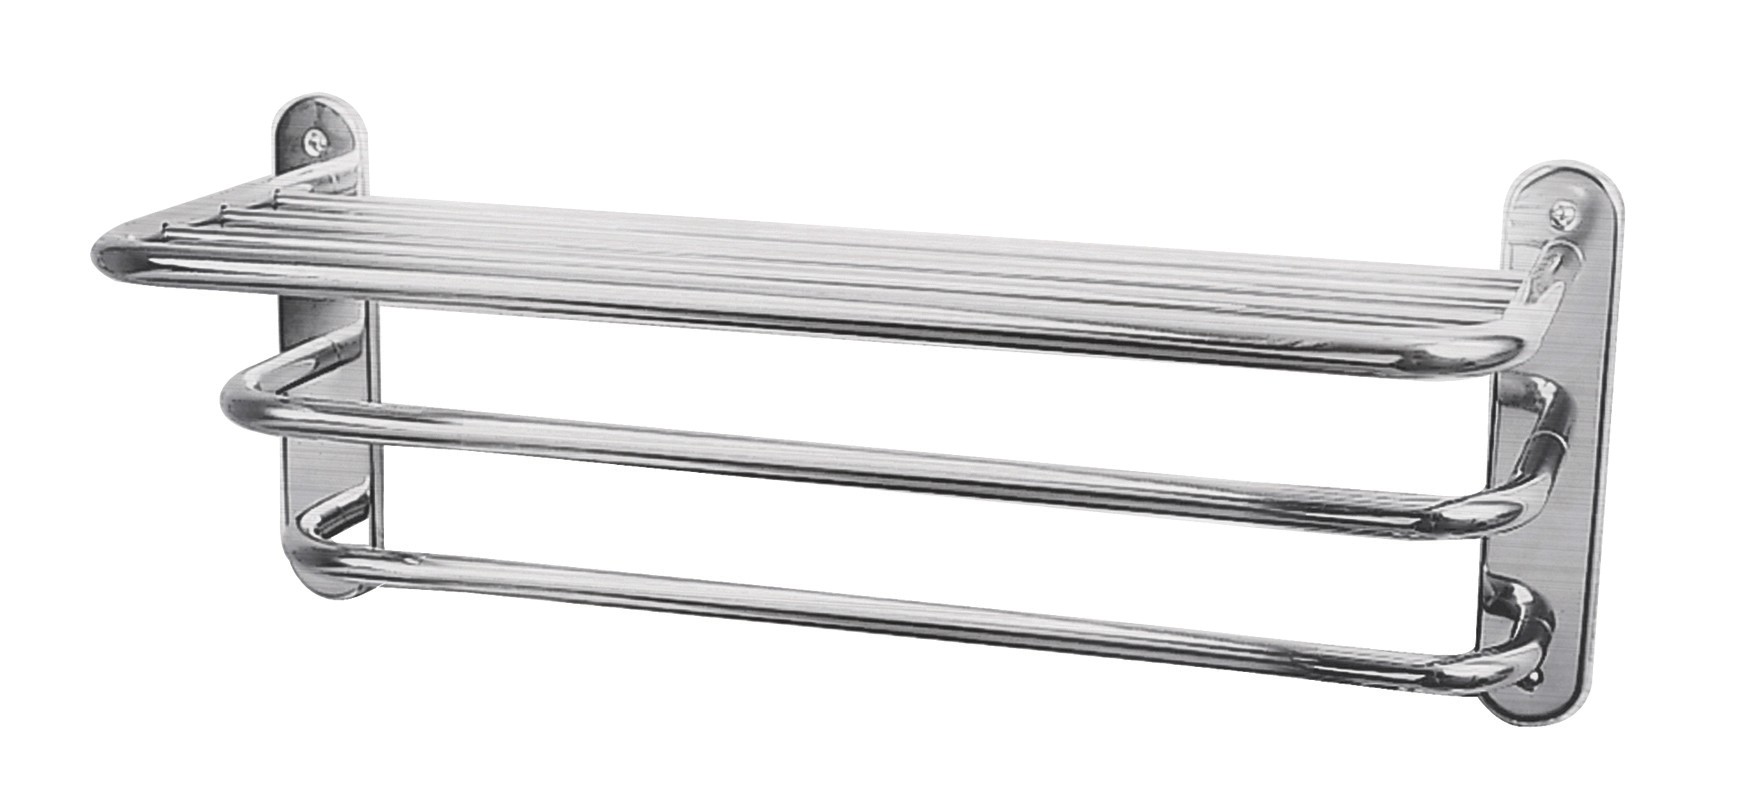 BC Designs Victrion 3 Tier Towel Rack 612 x 247mm Brushed Chrome [CMA045BC]